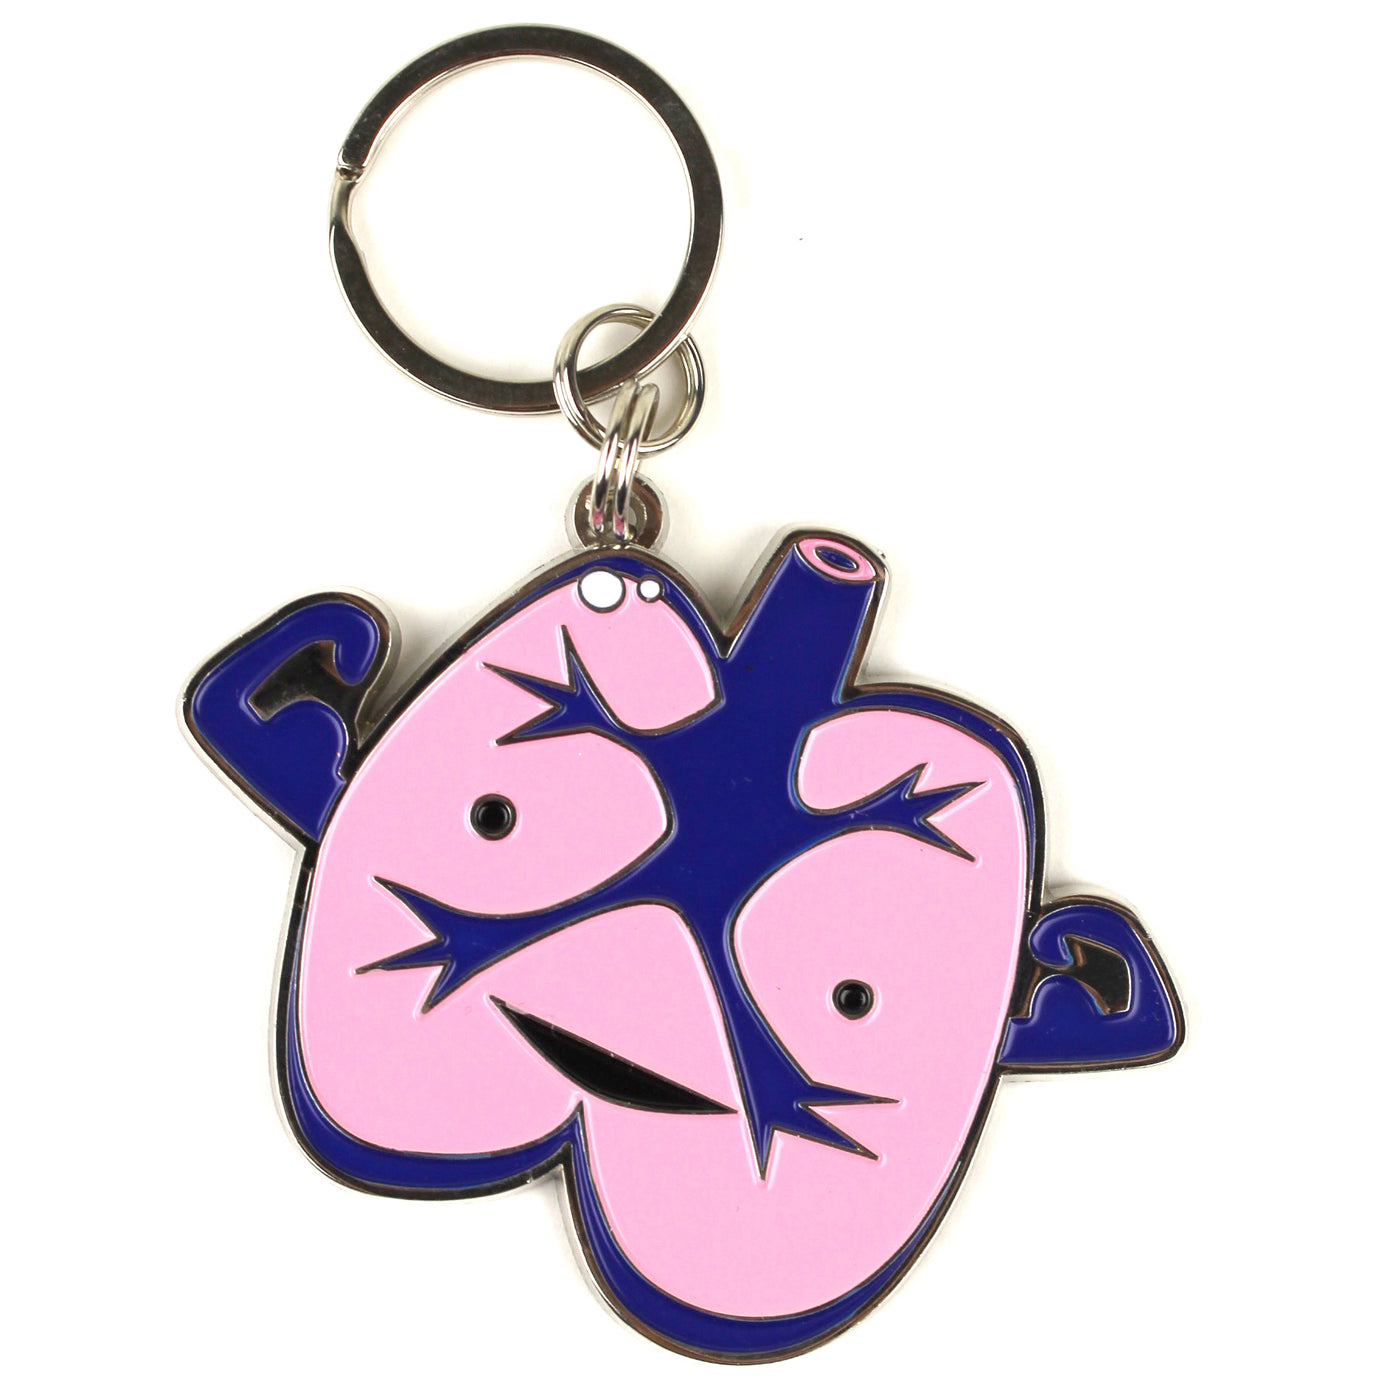 Lungs Keychain - Anatomical Lung Keychain - Human Organ Lungs Keychains